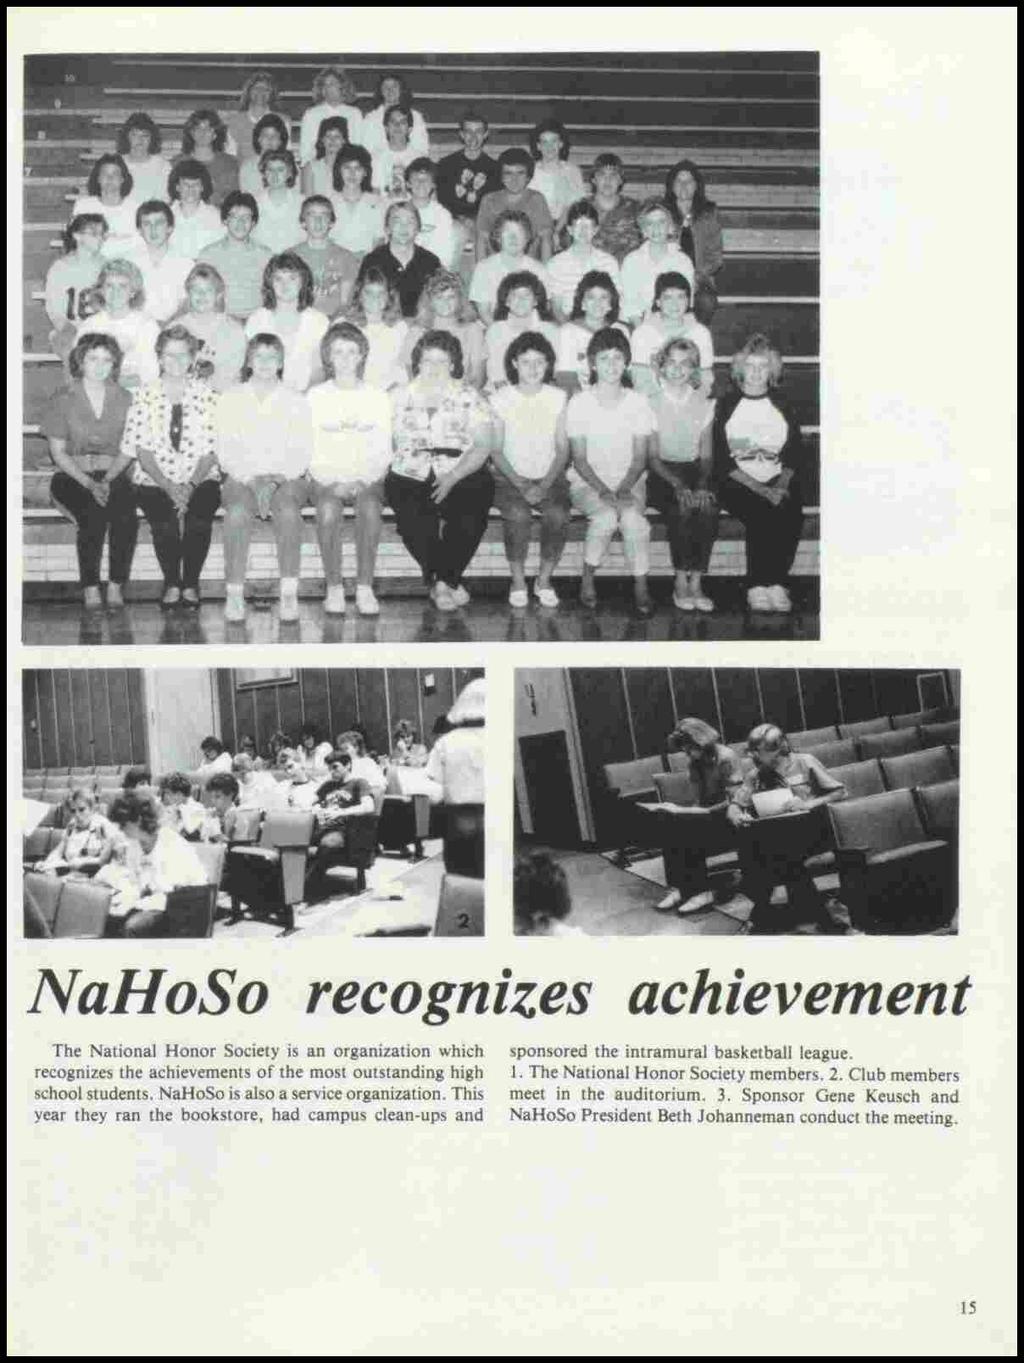 NaHoSo recognzzes achievement The National Honor Society is an organization which recognizes the achievements of the most outstanding high school students. NaHoSo is also a service organization.